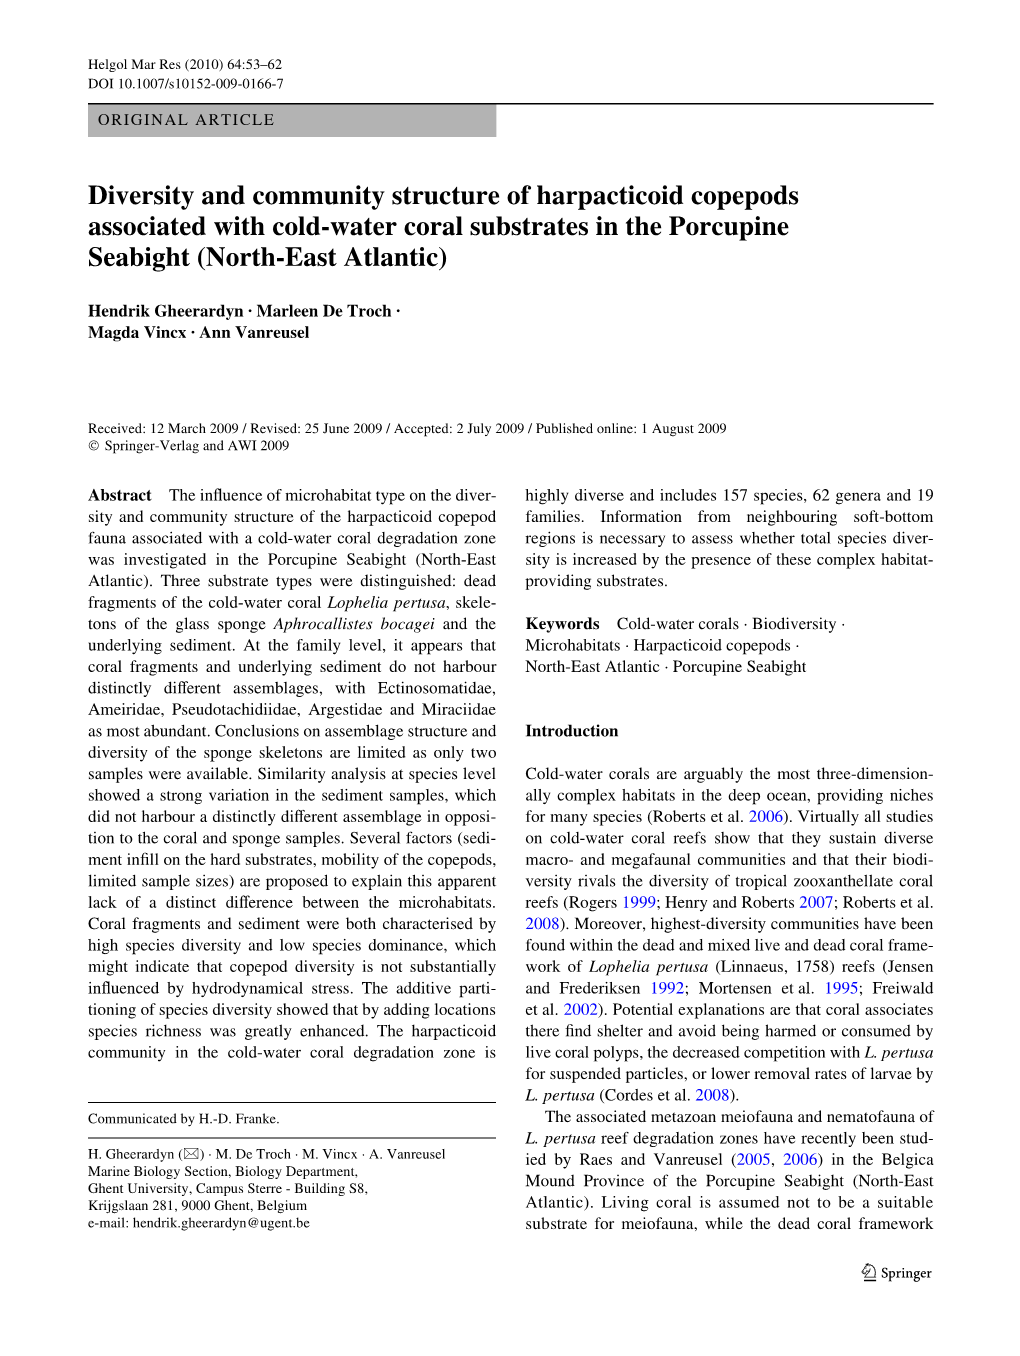 Diversity and Community Structure of Harpacticoid Copepods Associated with Cold-Water Coral Substrates in the Porcupine Seabight (North-East Atlantic)